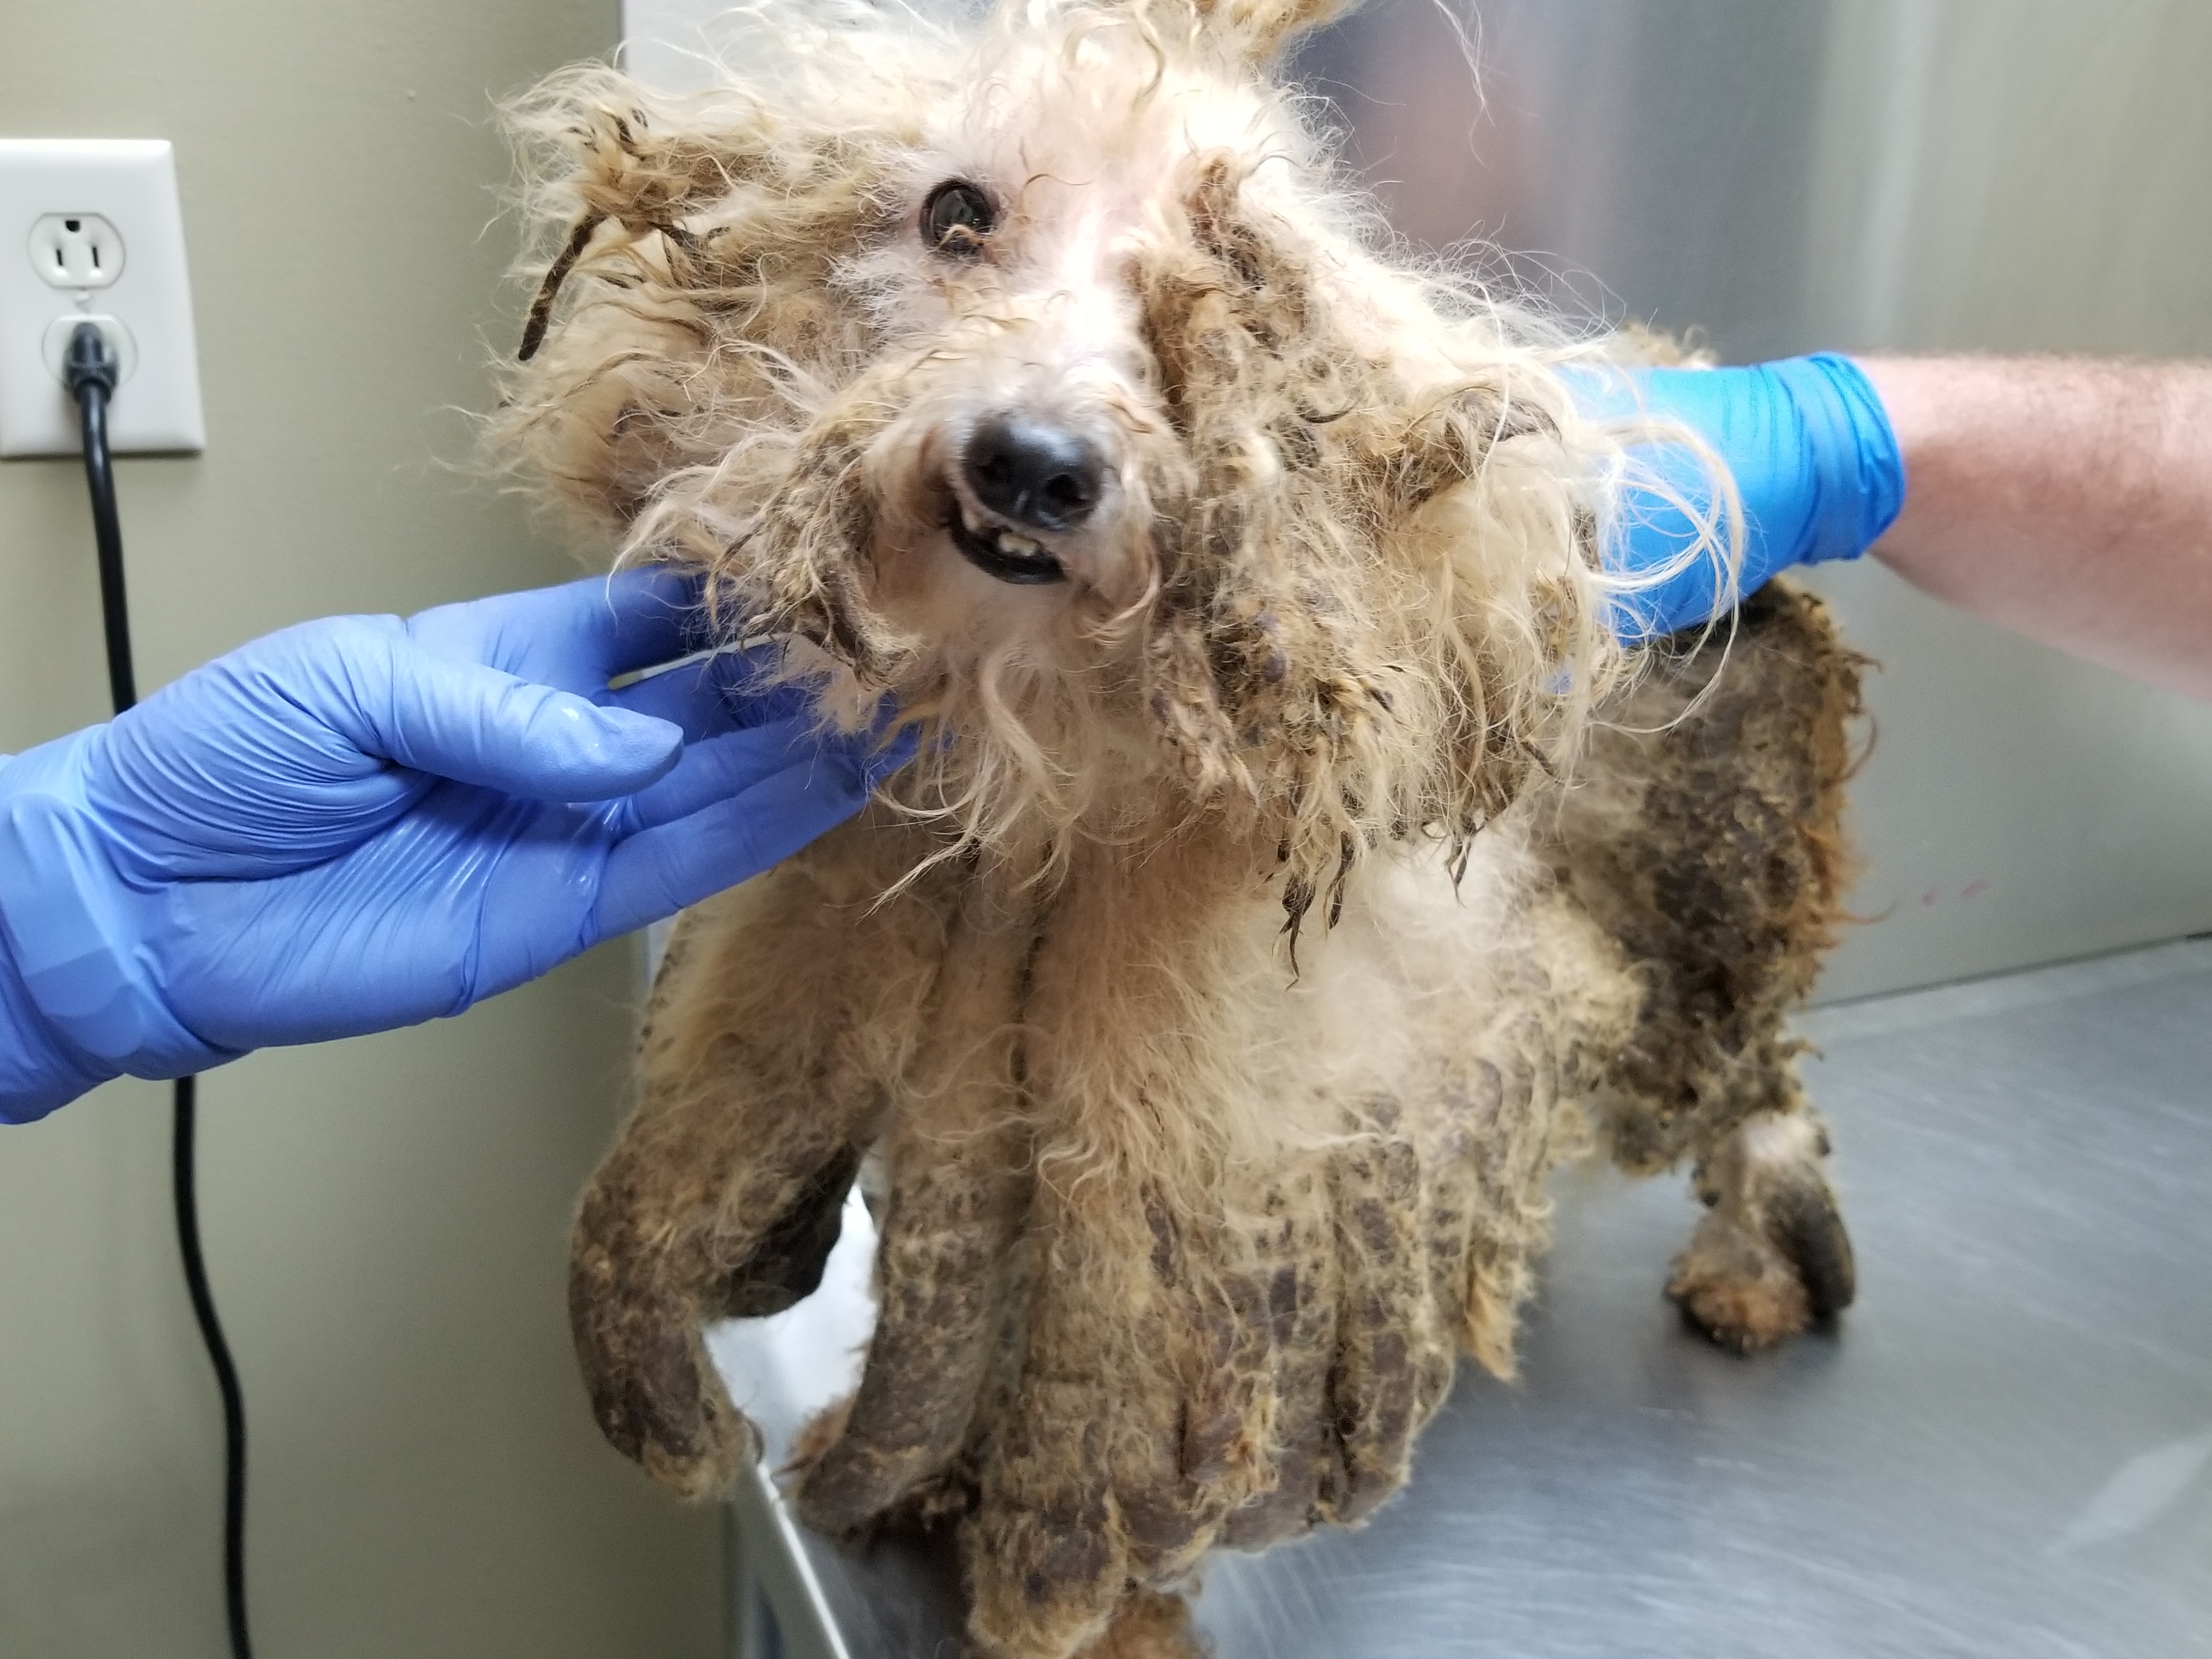 SPCA Over 40 Dead Dogs Found, 32 Other Animals Seized At Delaware